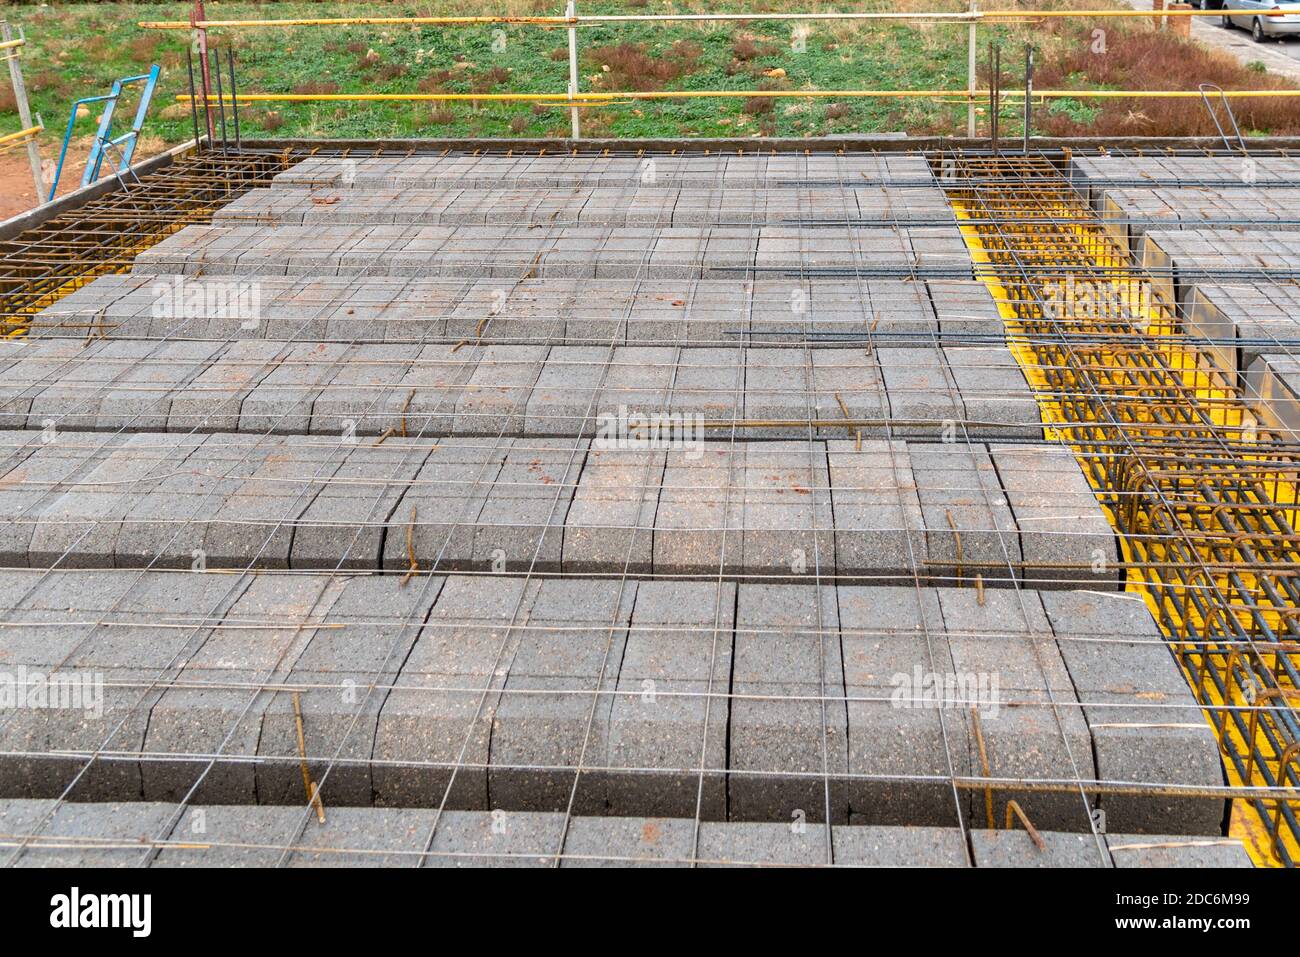 Detail of reinforced concrete slab with lightweight concrete blocks